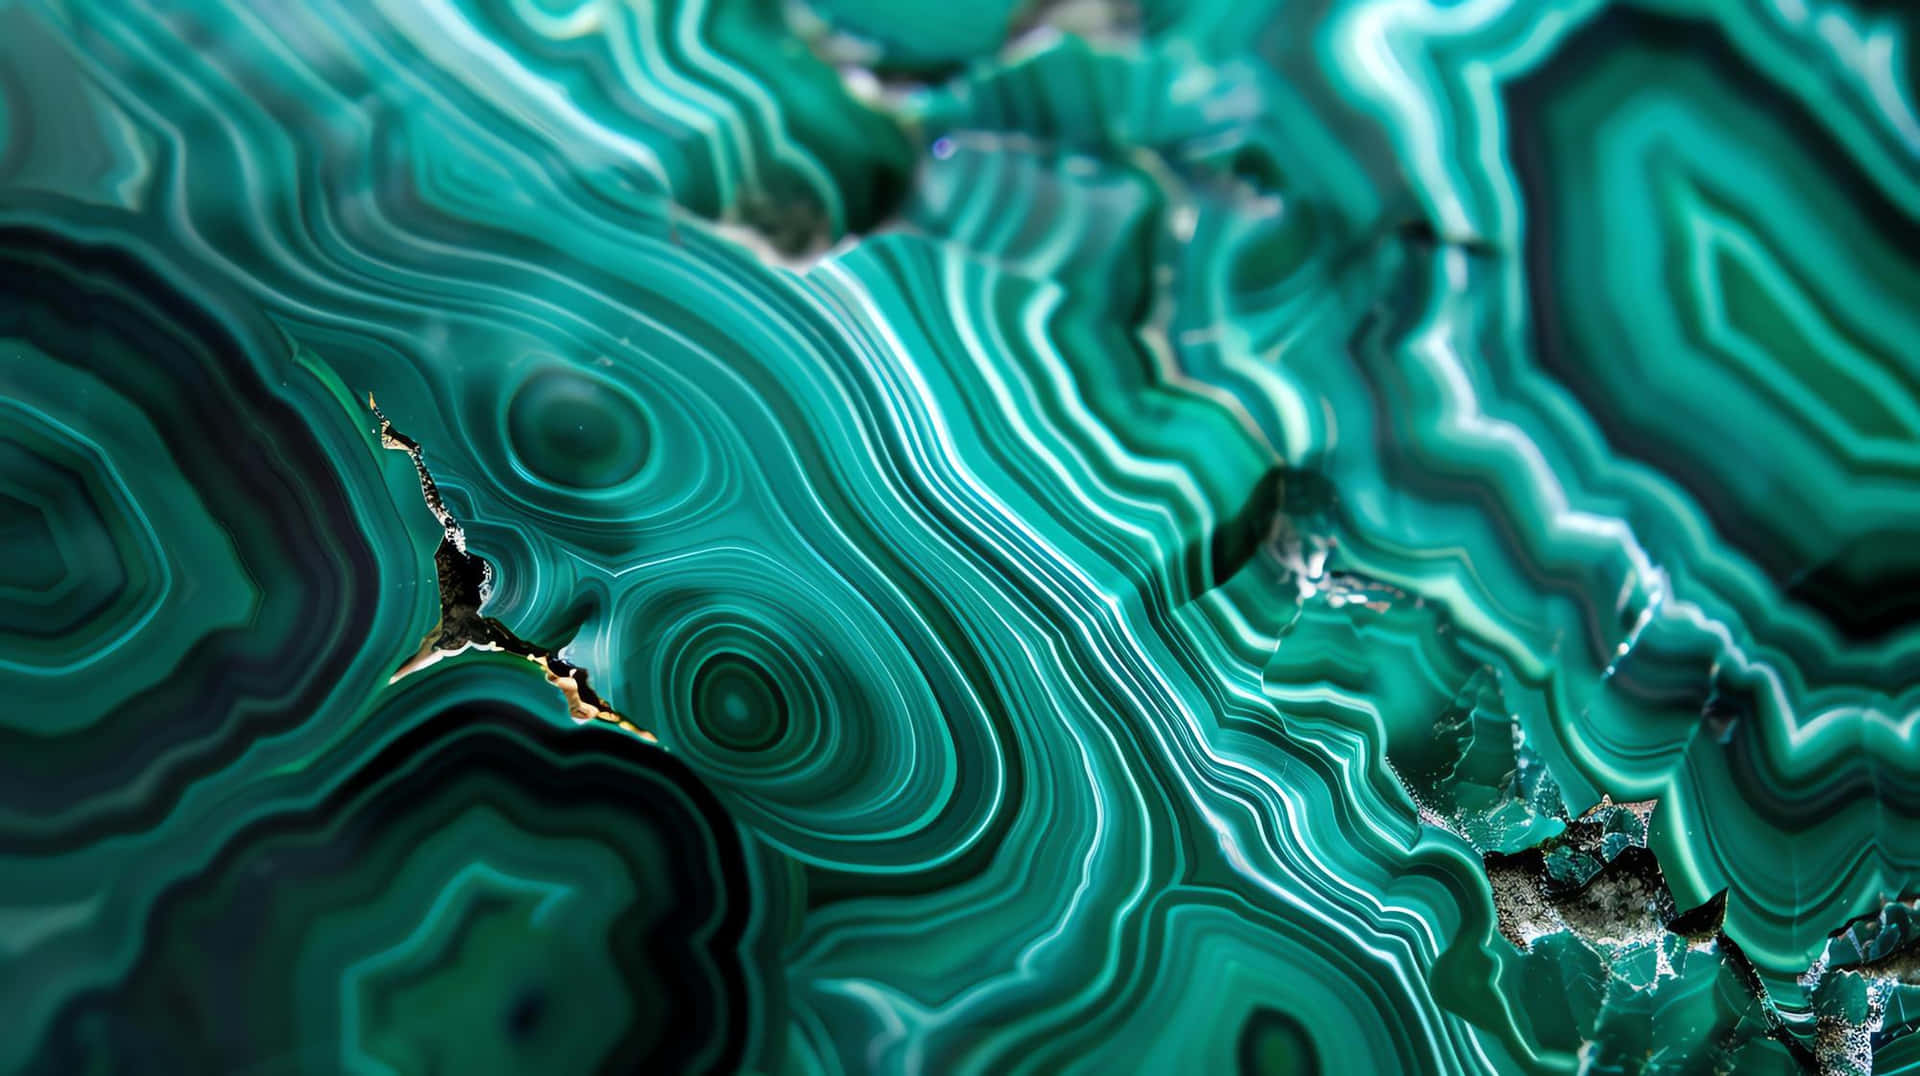 Malachite Green Banded Mineral Texture Wallpaper